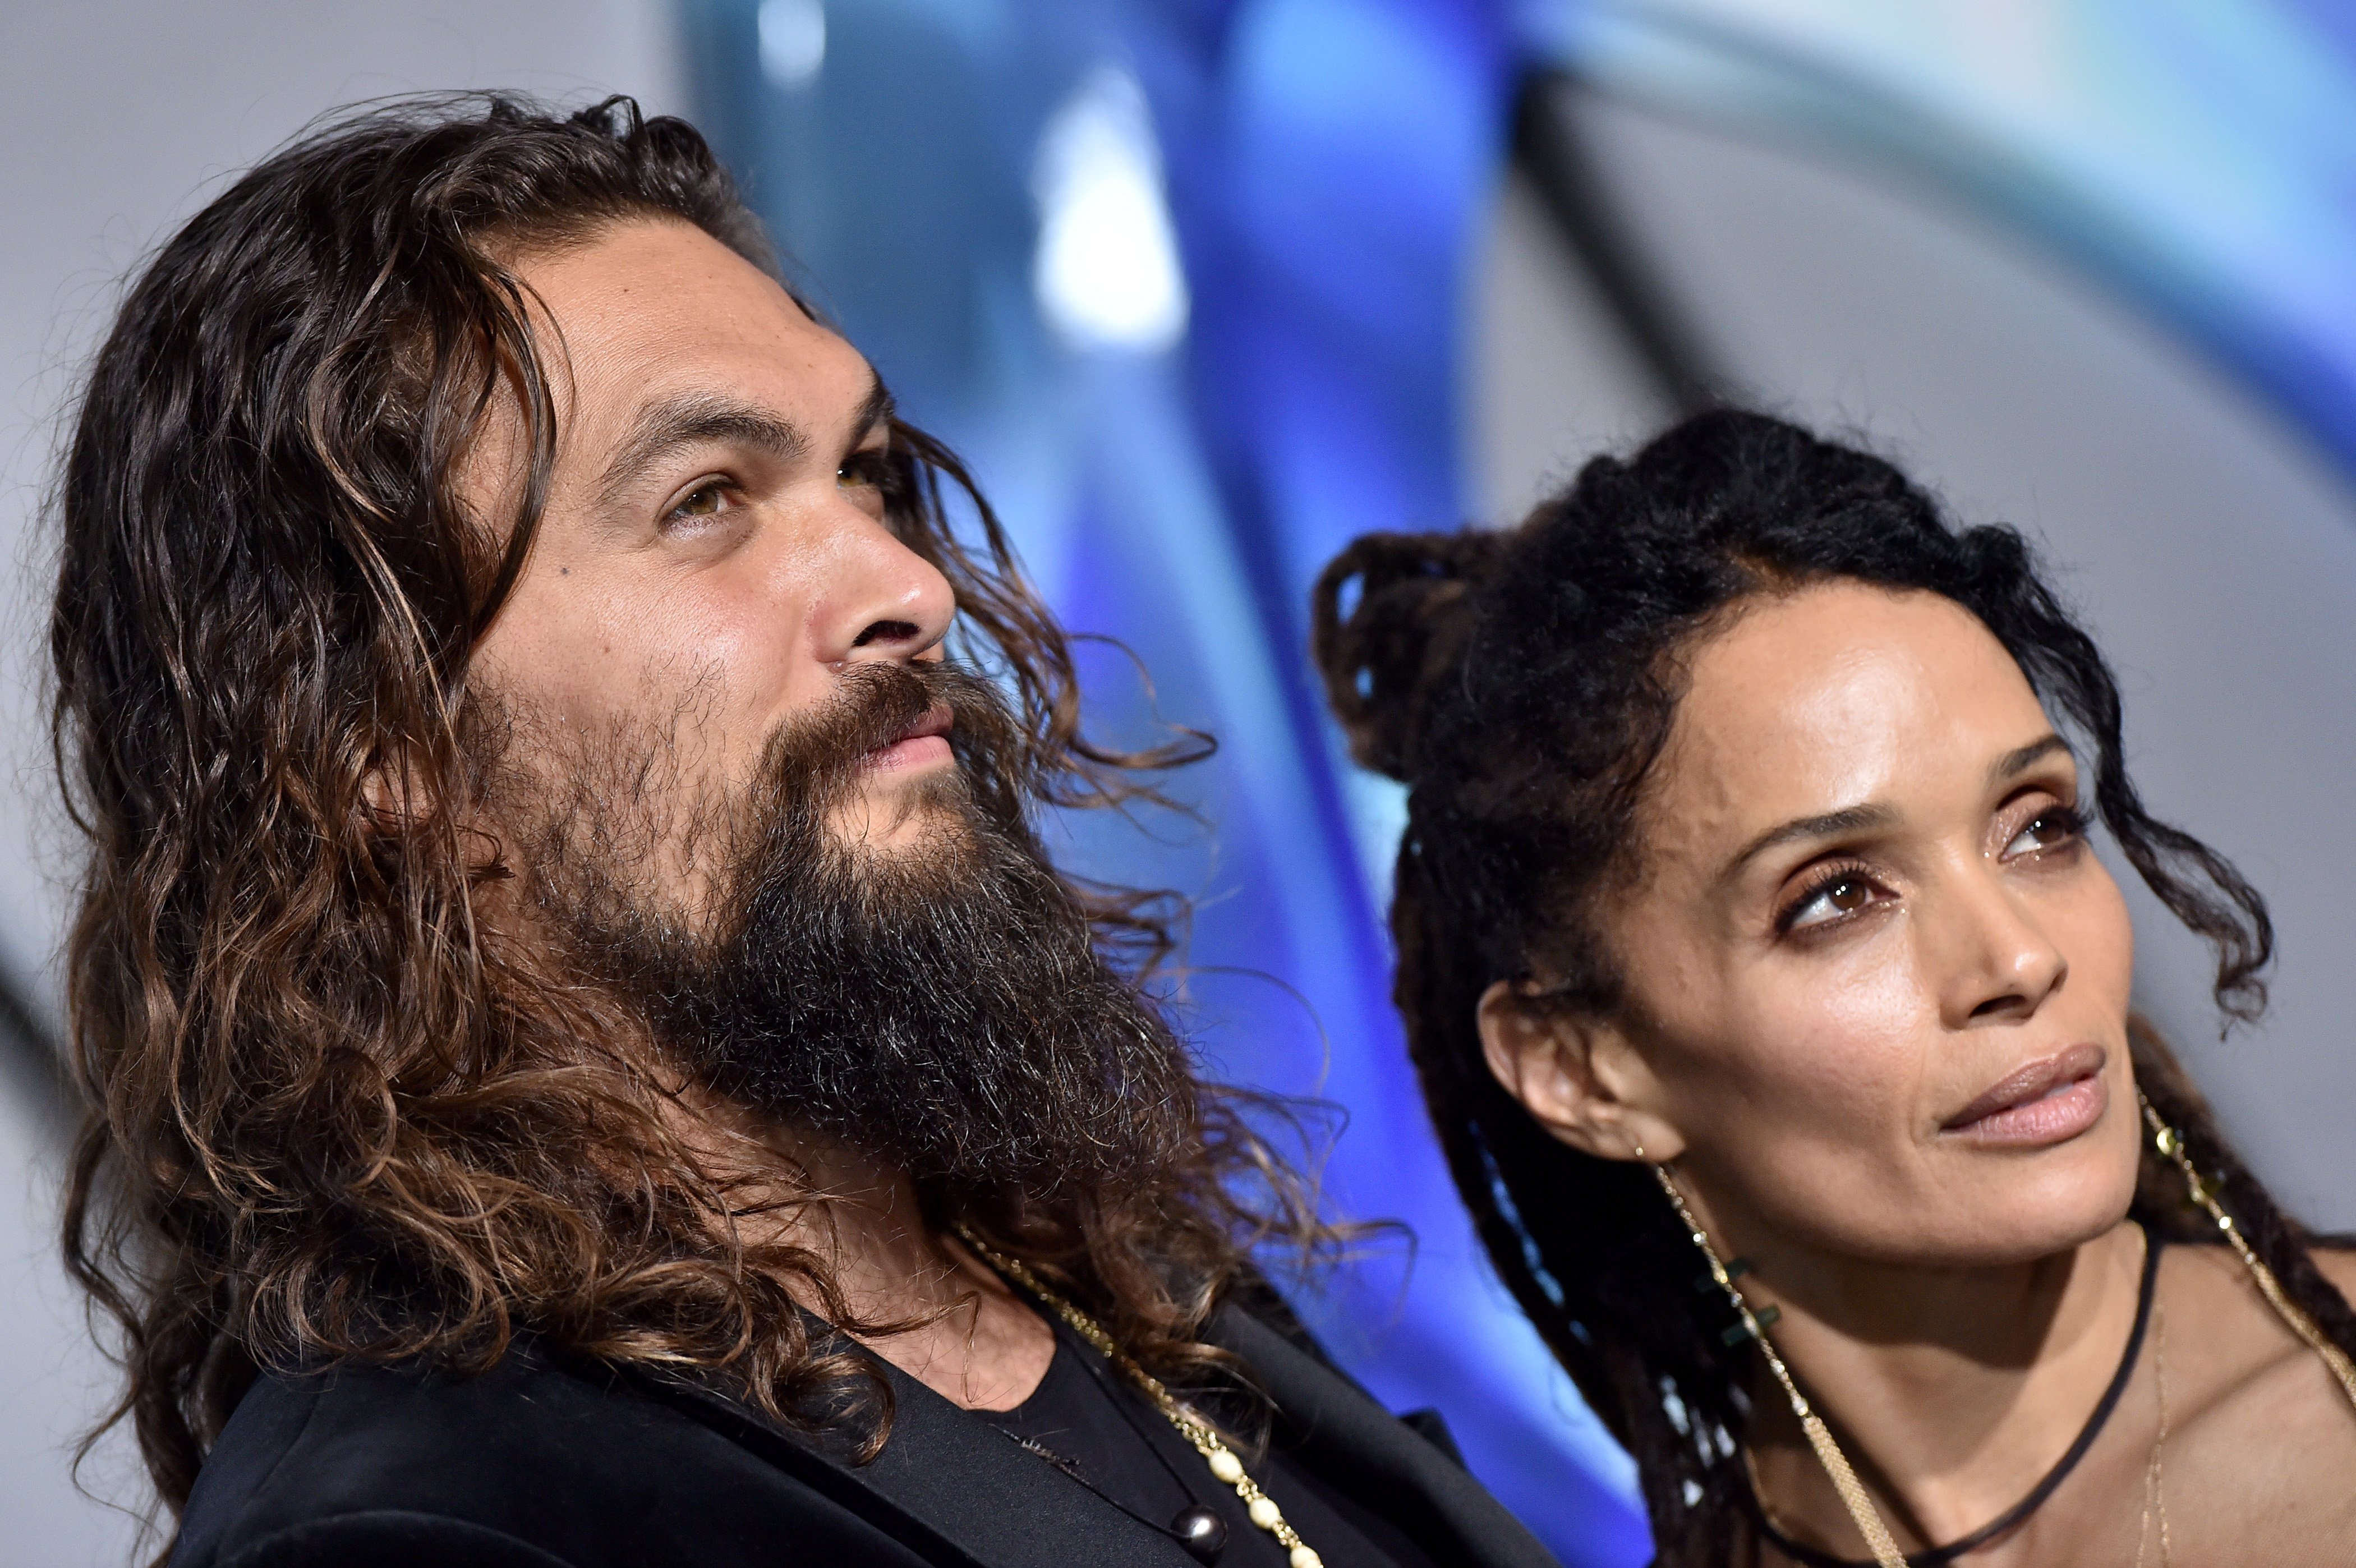 Filmmaker Jason Momoa and wife Lisa Bonet attend the premiere of "Aquaman" at TCL Chinese Theatre on December 12, 2018 in Hollywood, California. | Source: Getty Images